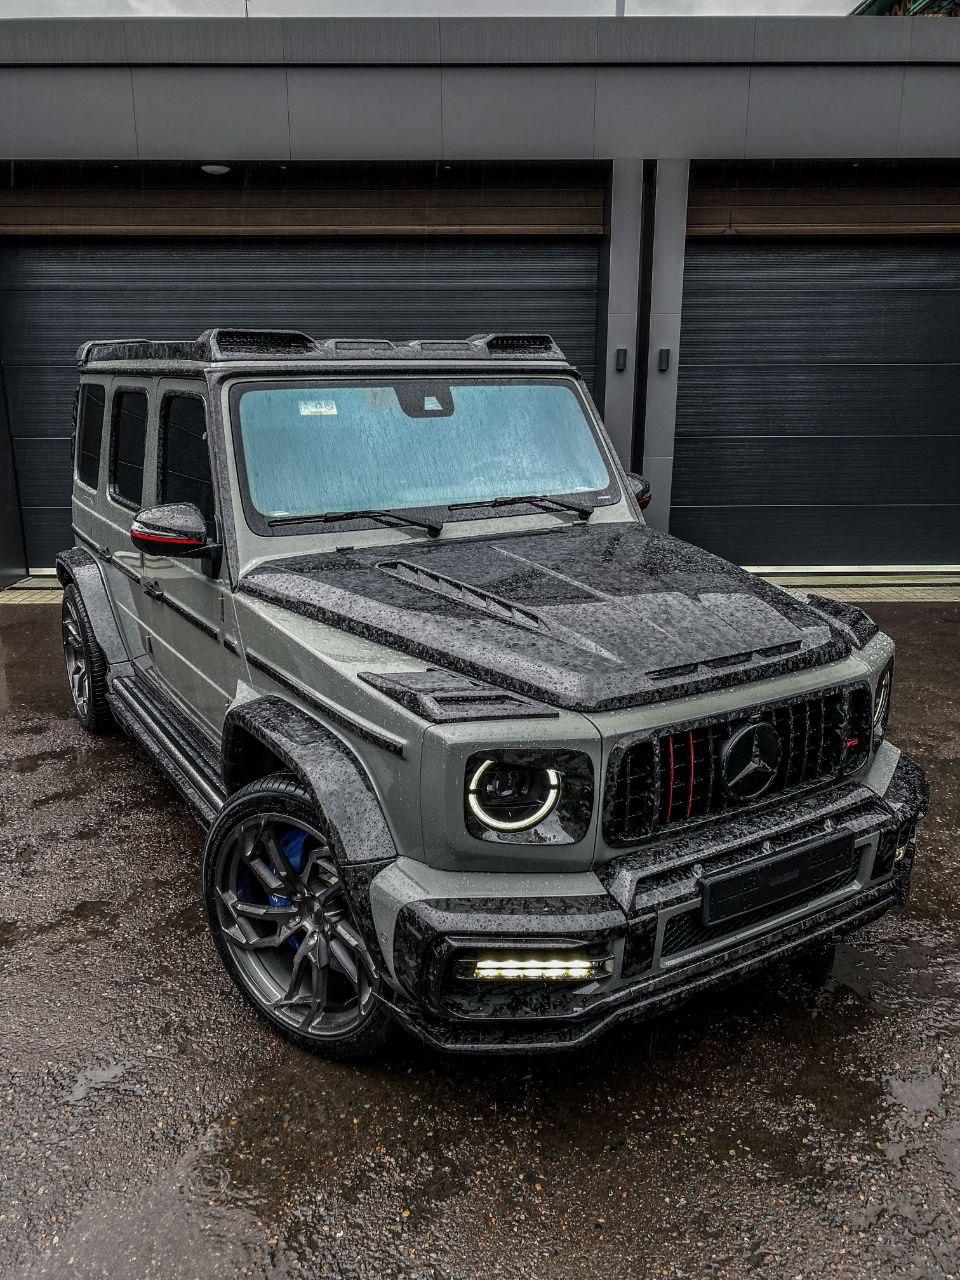 Check our price and buy Renegade Design body kit for Mercedes Benz G-class W463A